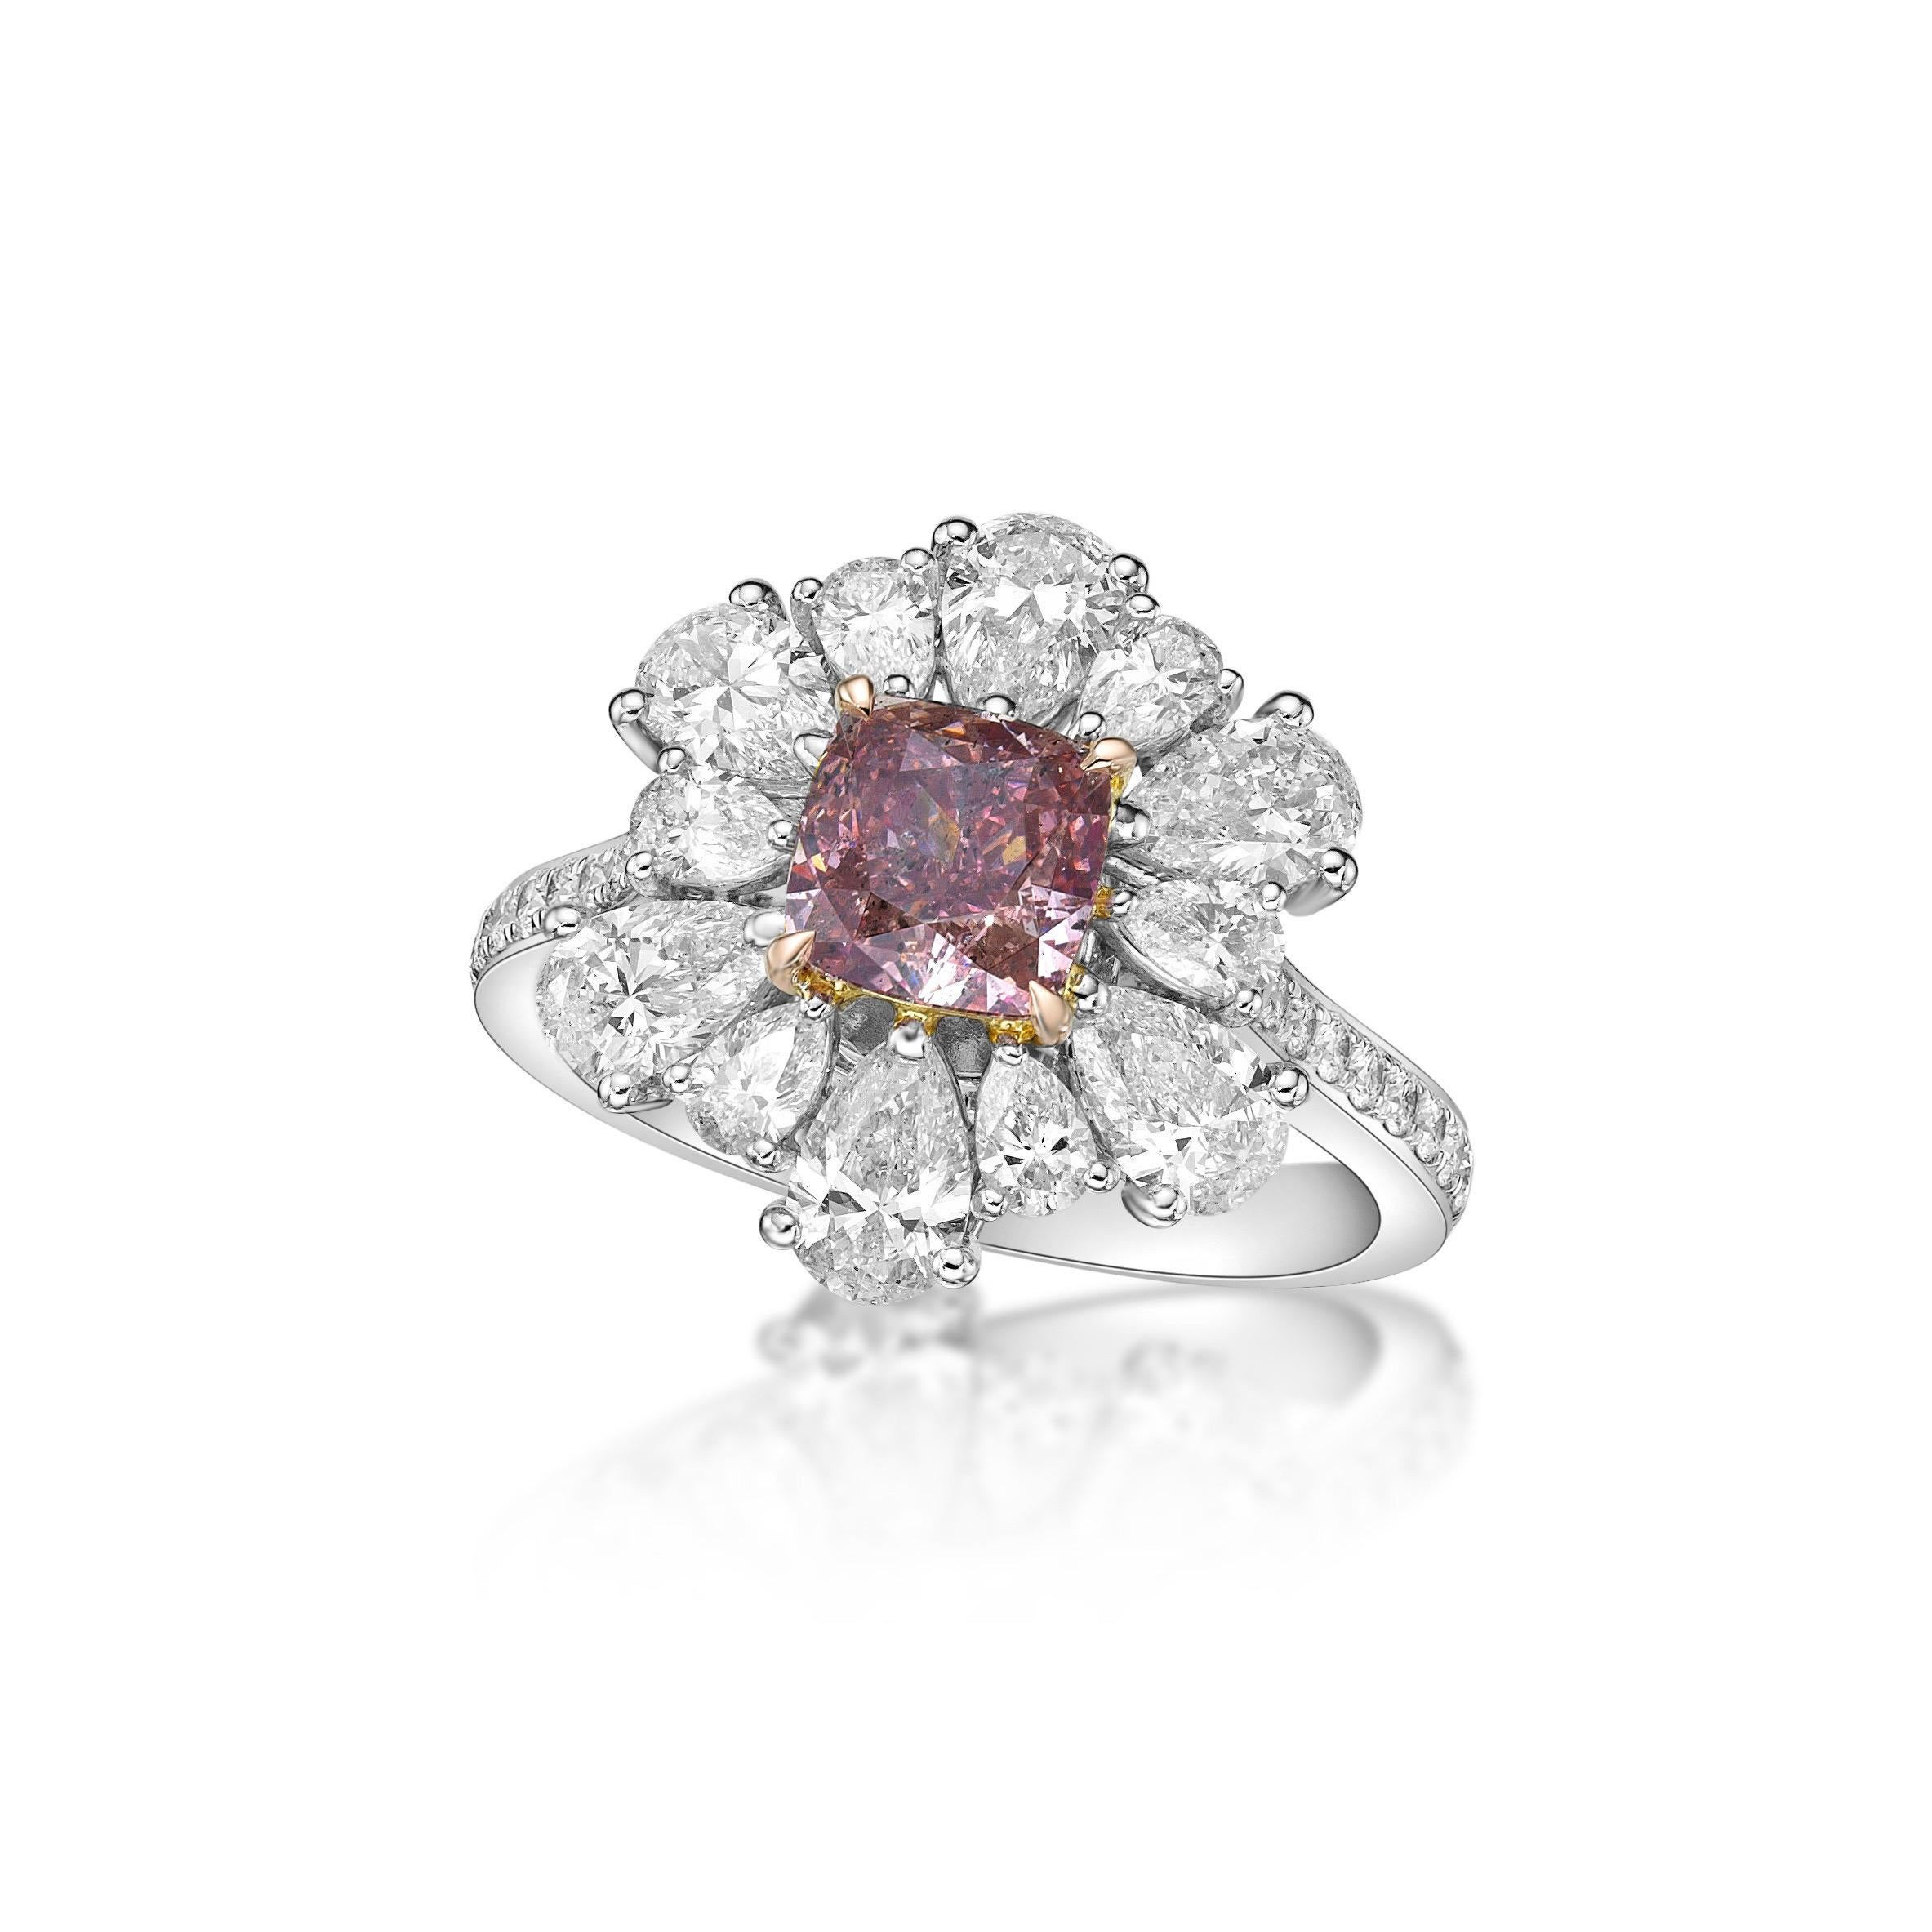 1 diamond center Gia certified natural fancy purple 1.30ct
12 diamonds 1.96ct
18 diamonds 0.21ct

From The Museum Vault at Emilio Jewelry Located on New York's iconic Fifth Avenue,
Showcasing a very special and rare Gia certified natural purple